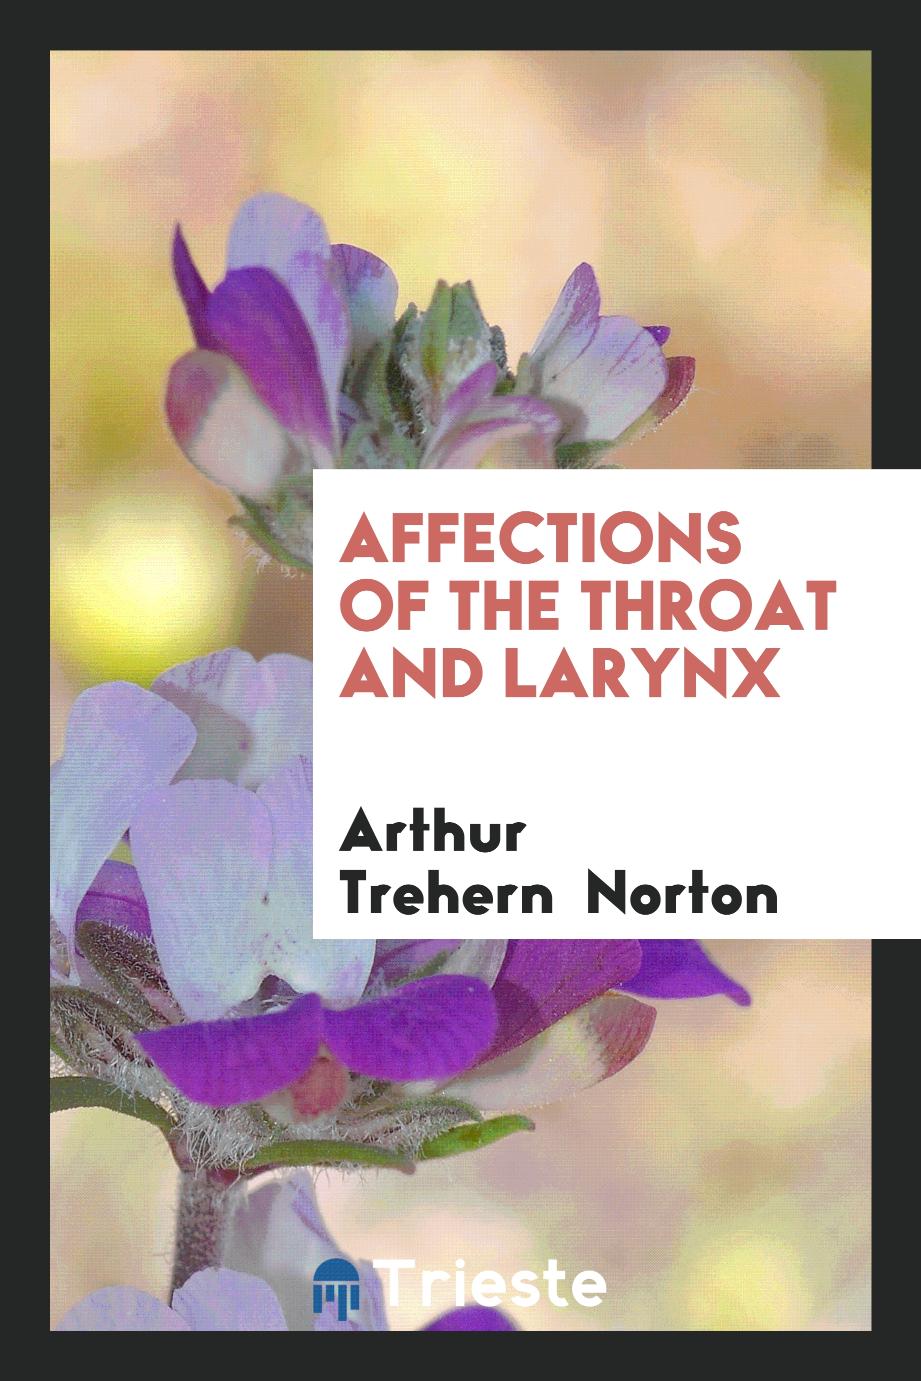 Affections of the throat and larynx